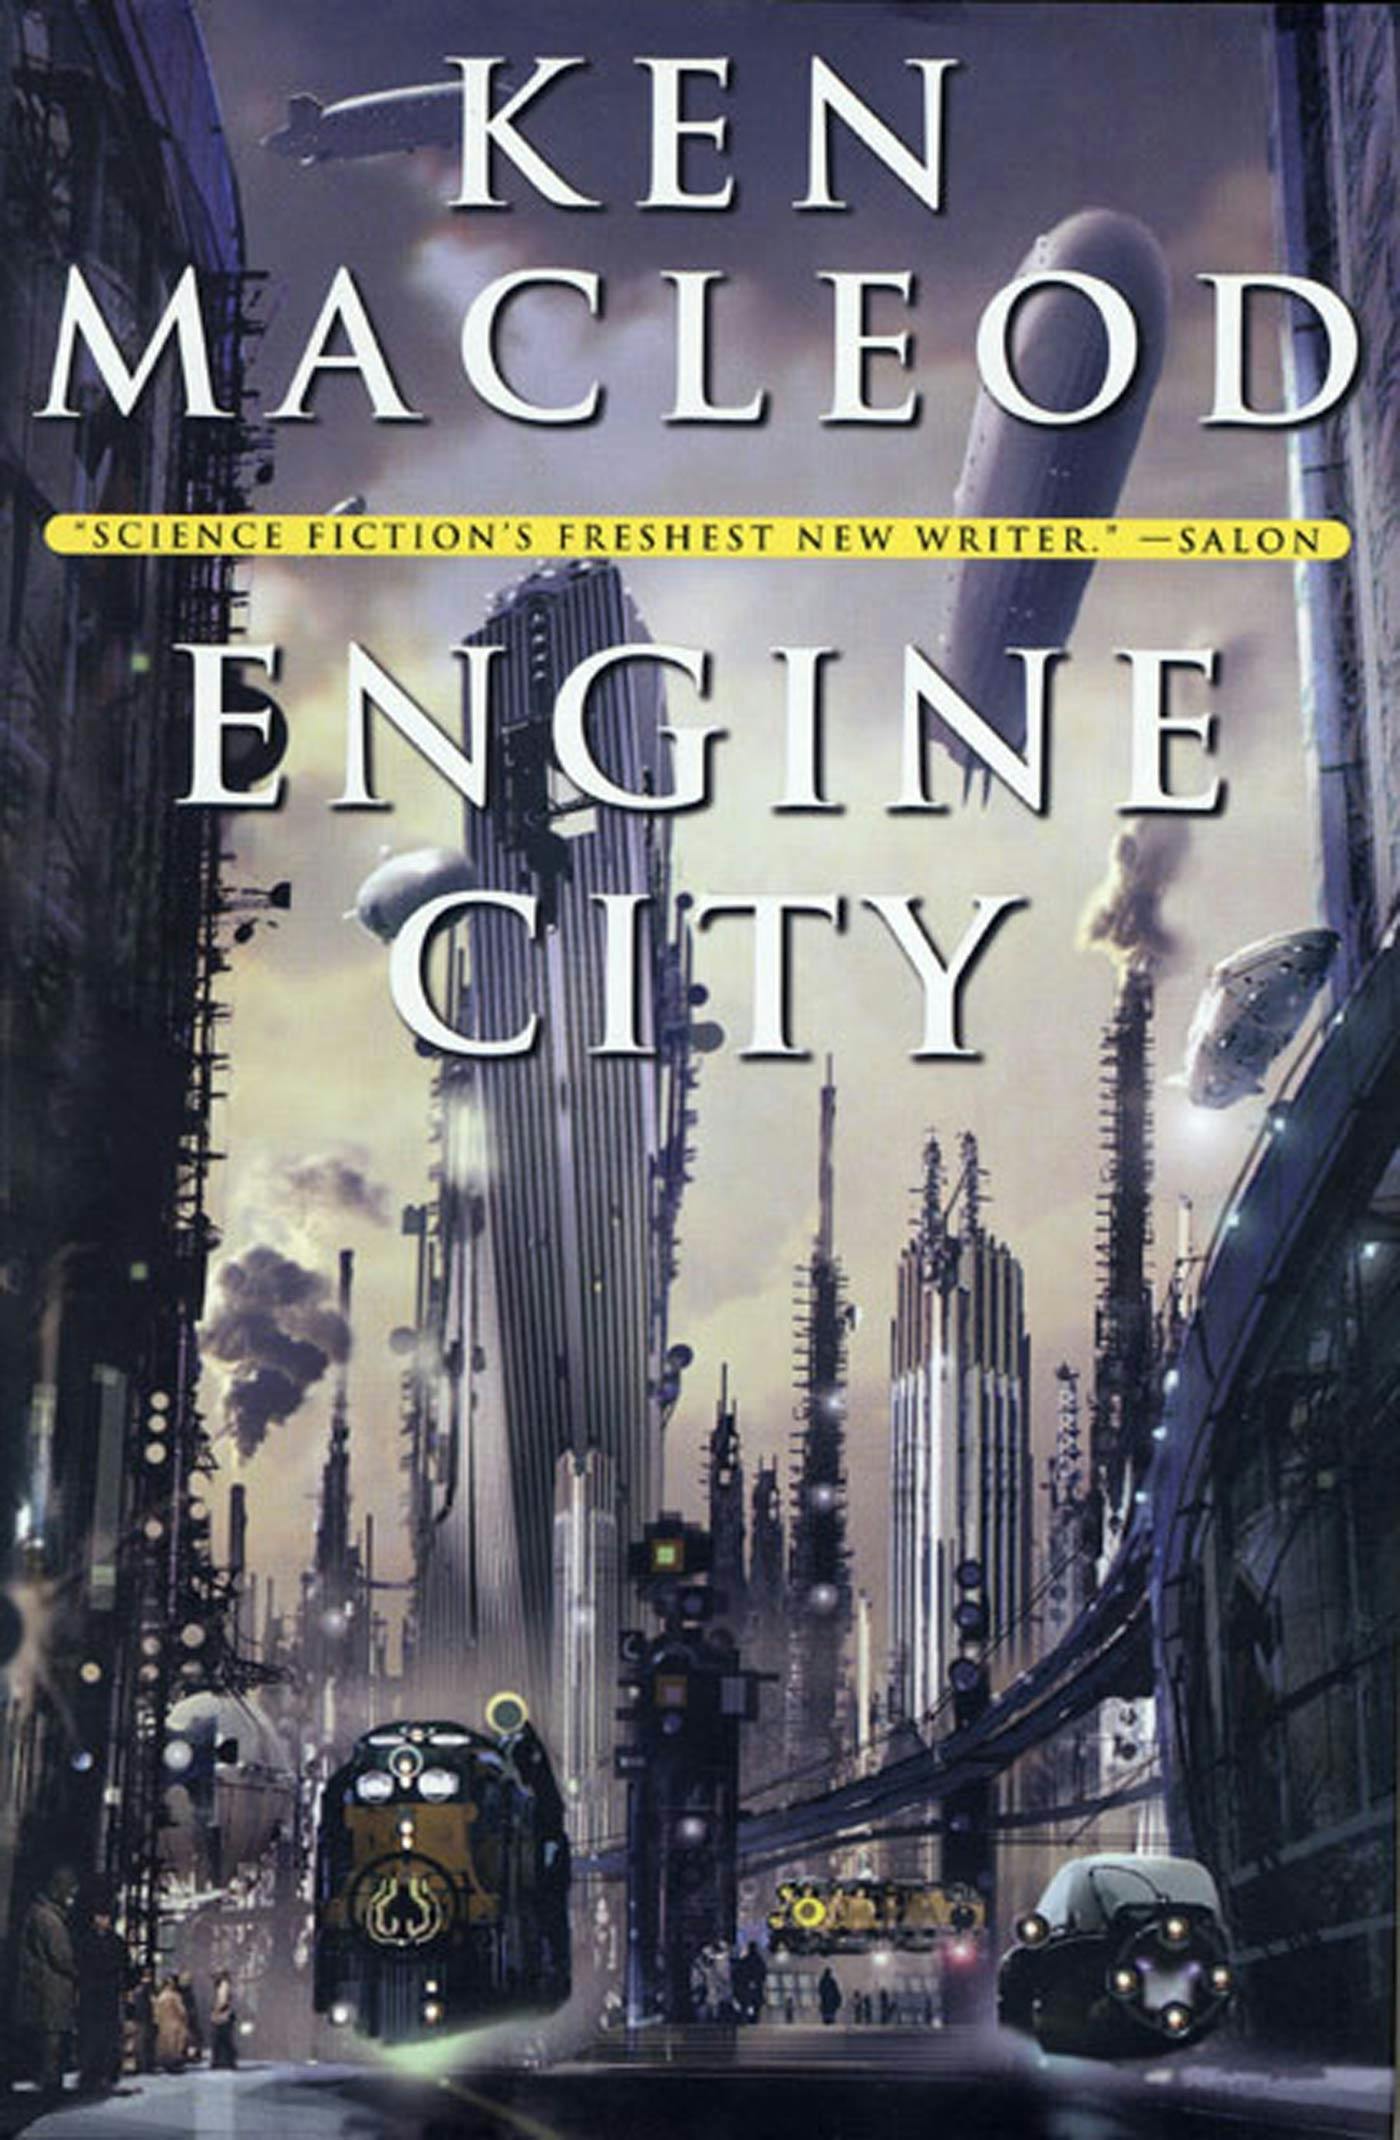 Cover for the book titled as: Engine City